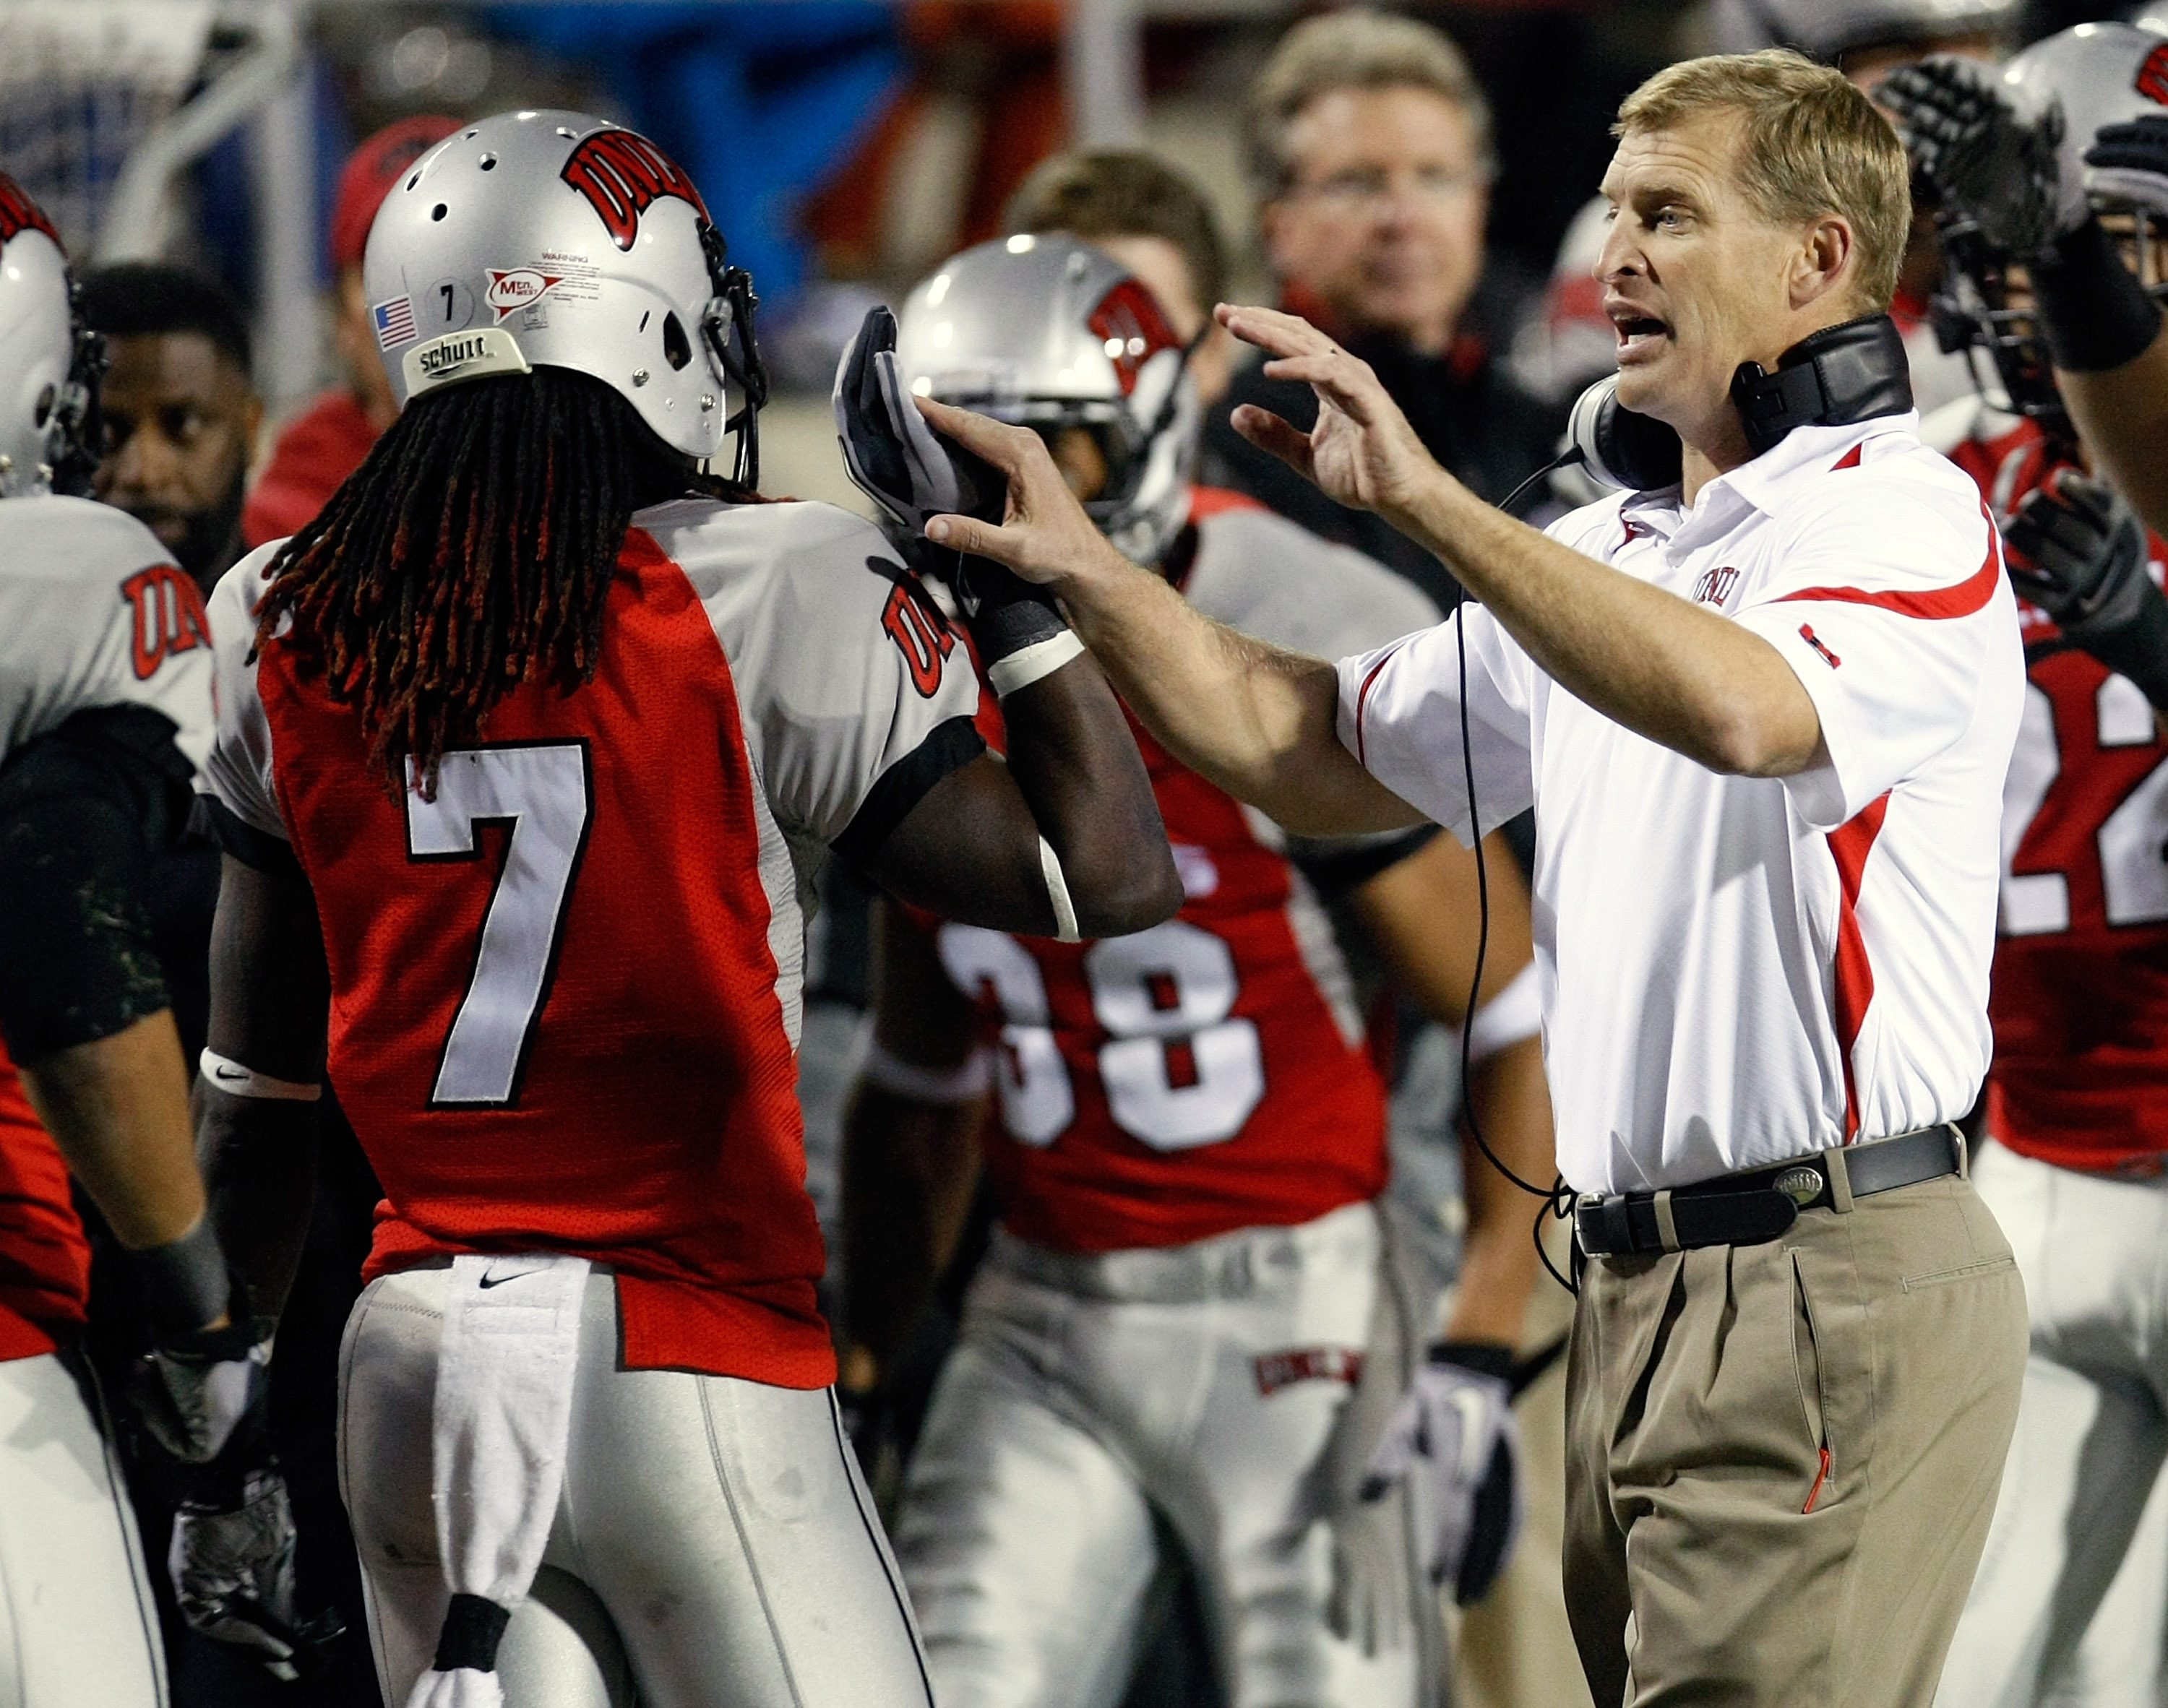 LAS VEGAS - NOVEMBER 13:  Head coach Bobby Hauck of the UNLV Rebels celebrates on the sideline with Michael Johnson #7 during a game against the Wyoming Cowboys at Sam Boyd Stadium November 13, 2010 in Las Vegas, Nevada. UNLV won 42-16.  (Photo by Ethan M